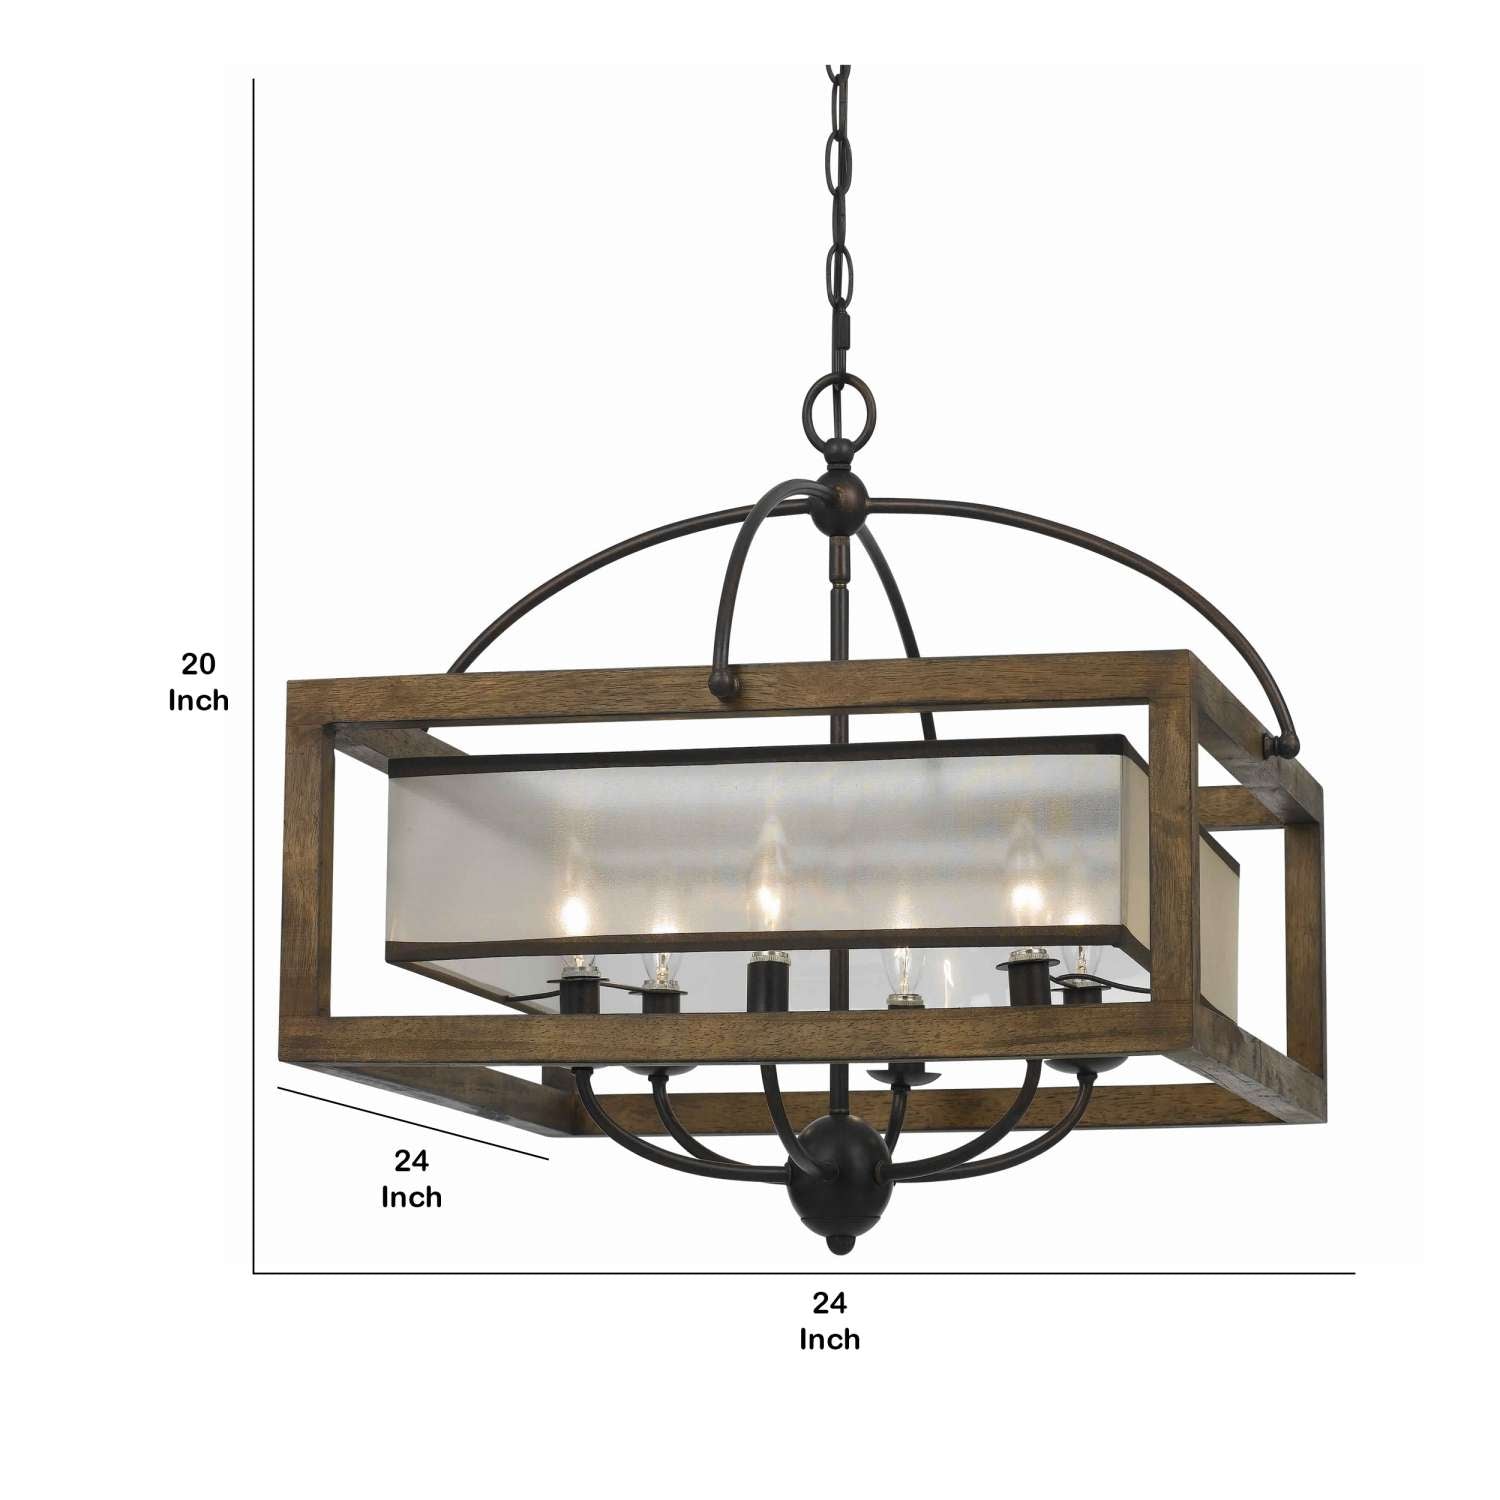 6 Bulb Square Chandelier With Wooden Frame And Organza Striped Shade, Brown By Benzara